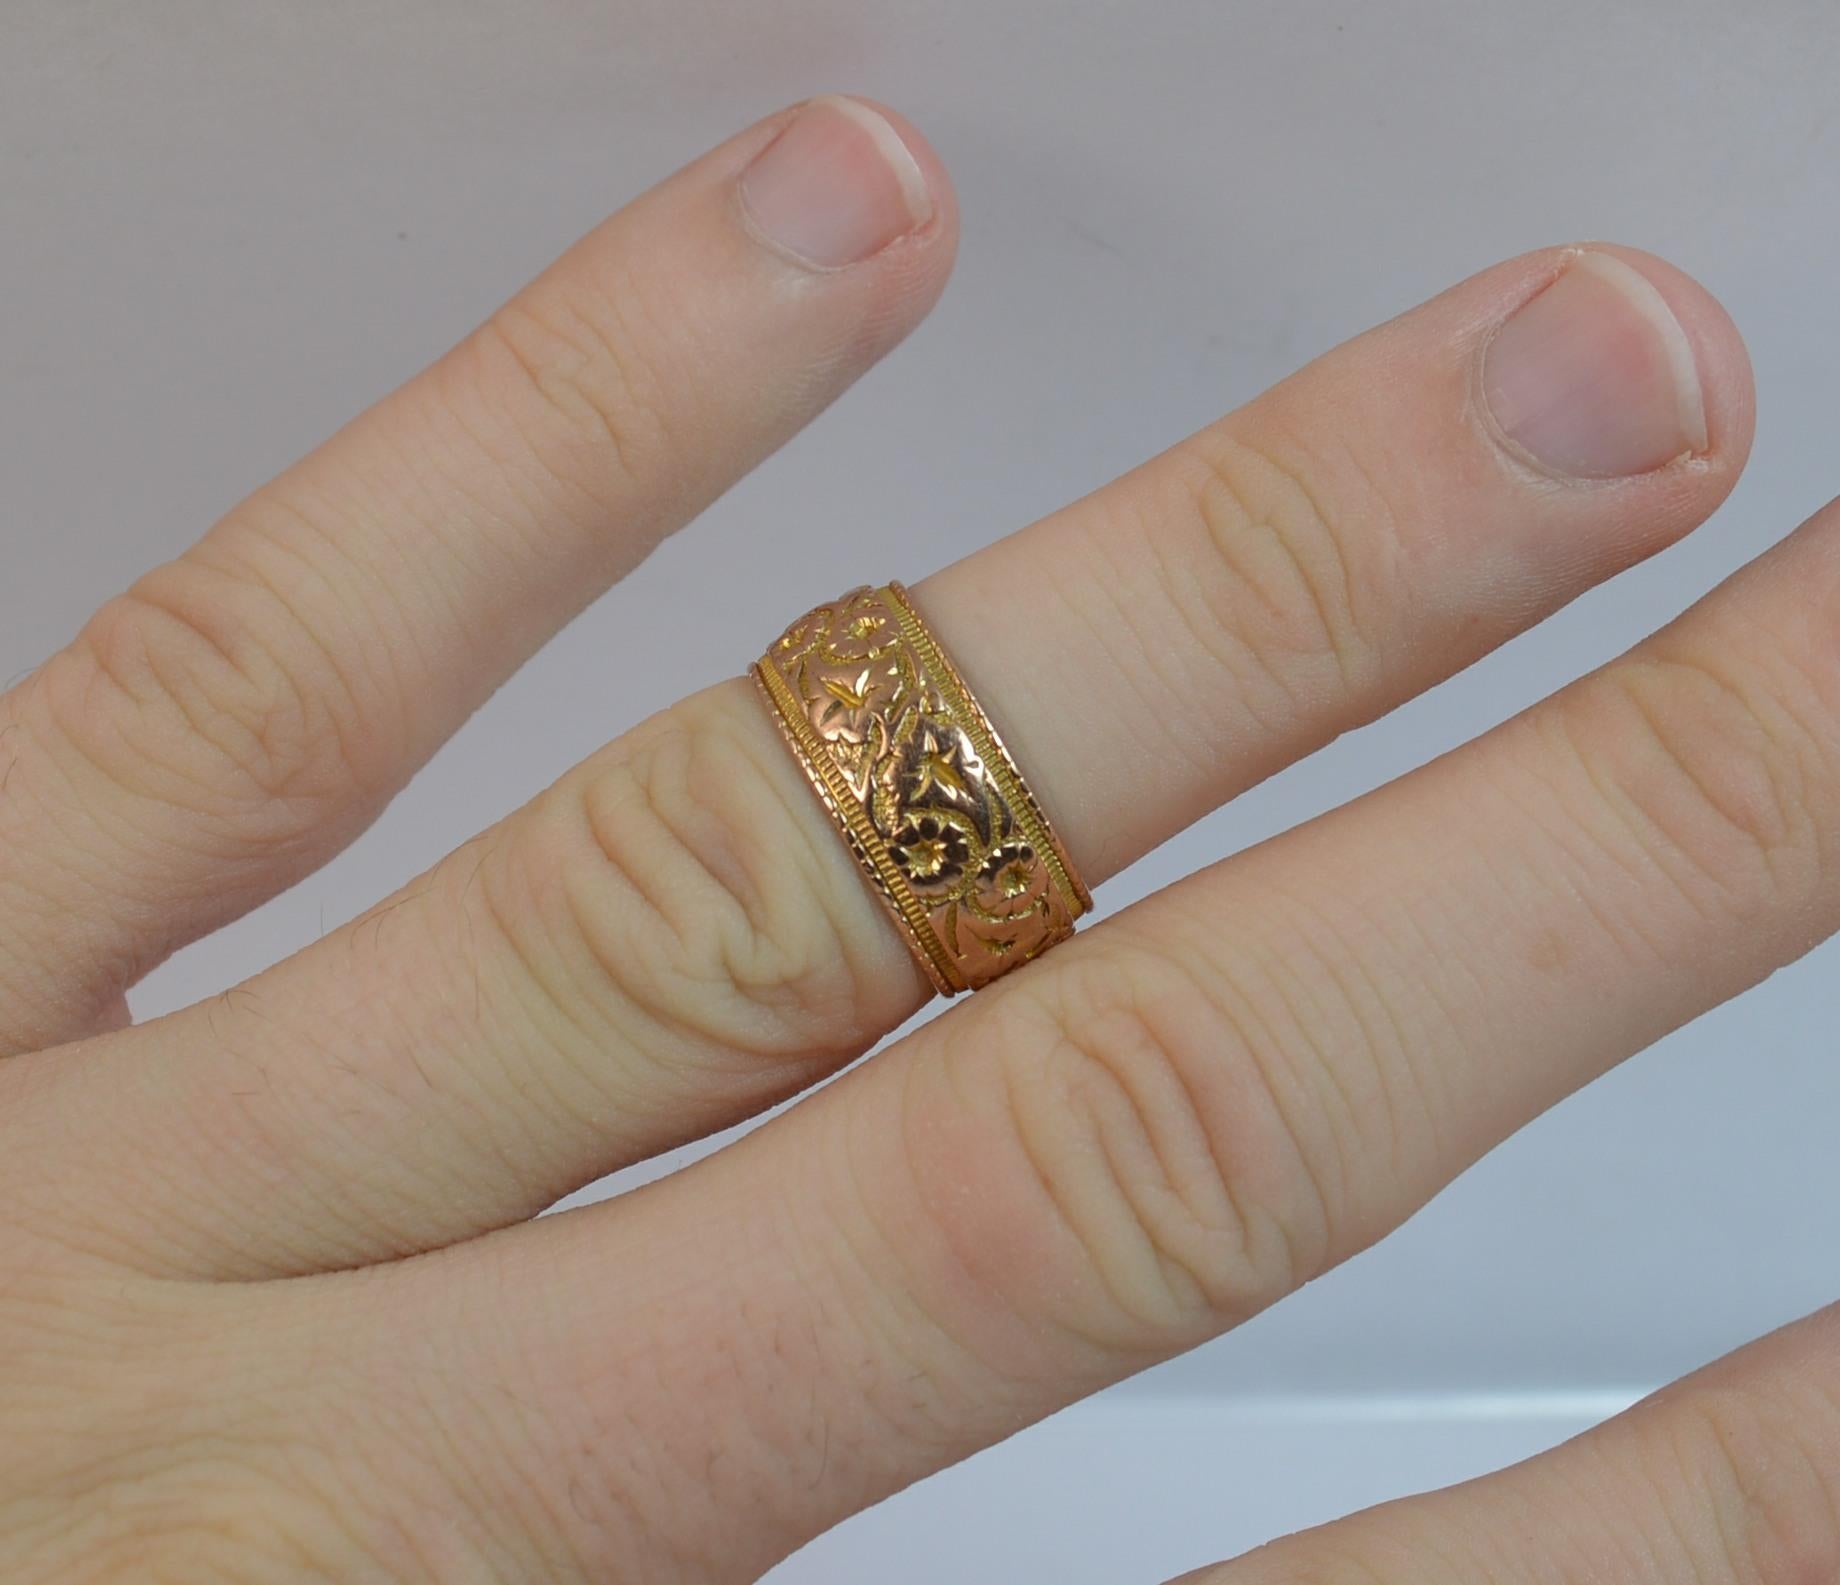 
A true solid 9 carat rose gold stack band ring.

A large 8mm wide band throughout with an ivy leaf design throughout.

Size K UK, 5 1/4 US. 4.4 Grams. Excellent condition. Crisp pattern and crisp hallmarks.